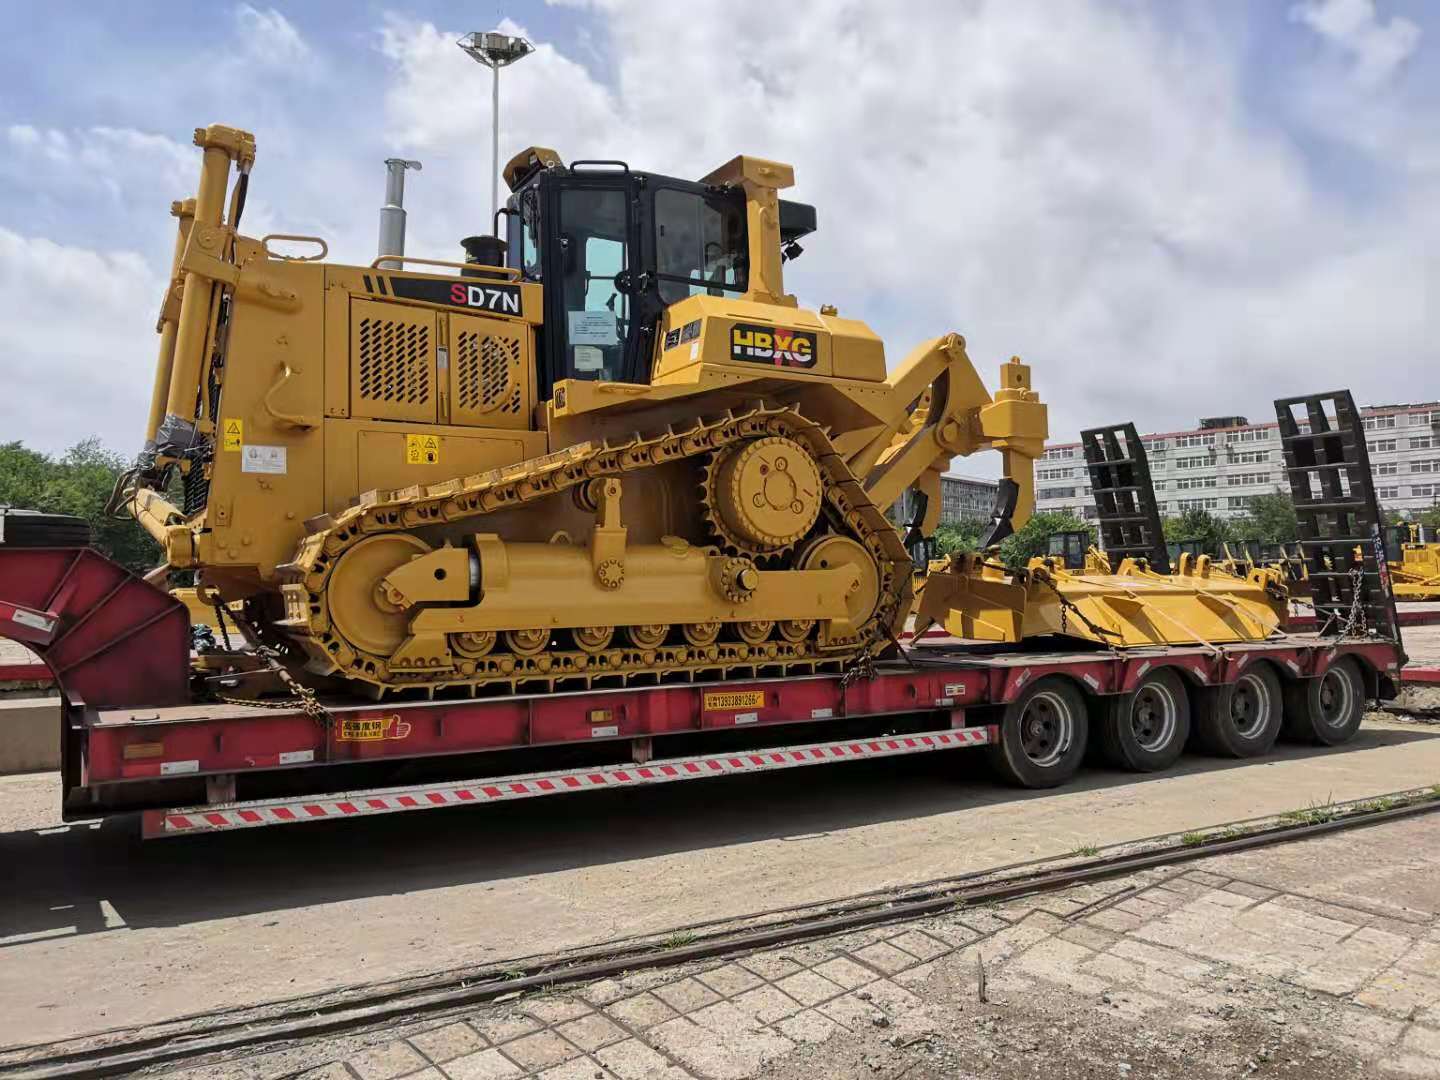 The SD7N bulldozer ordered by Ghanaian Customer is deliveried smoothly